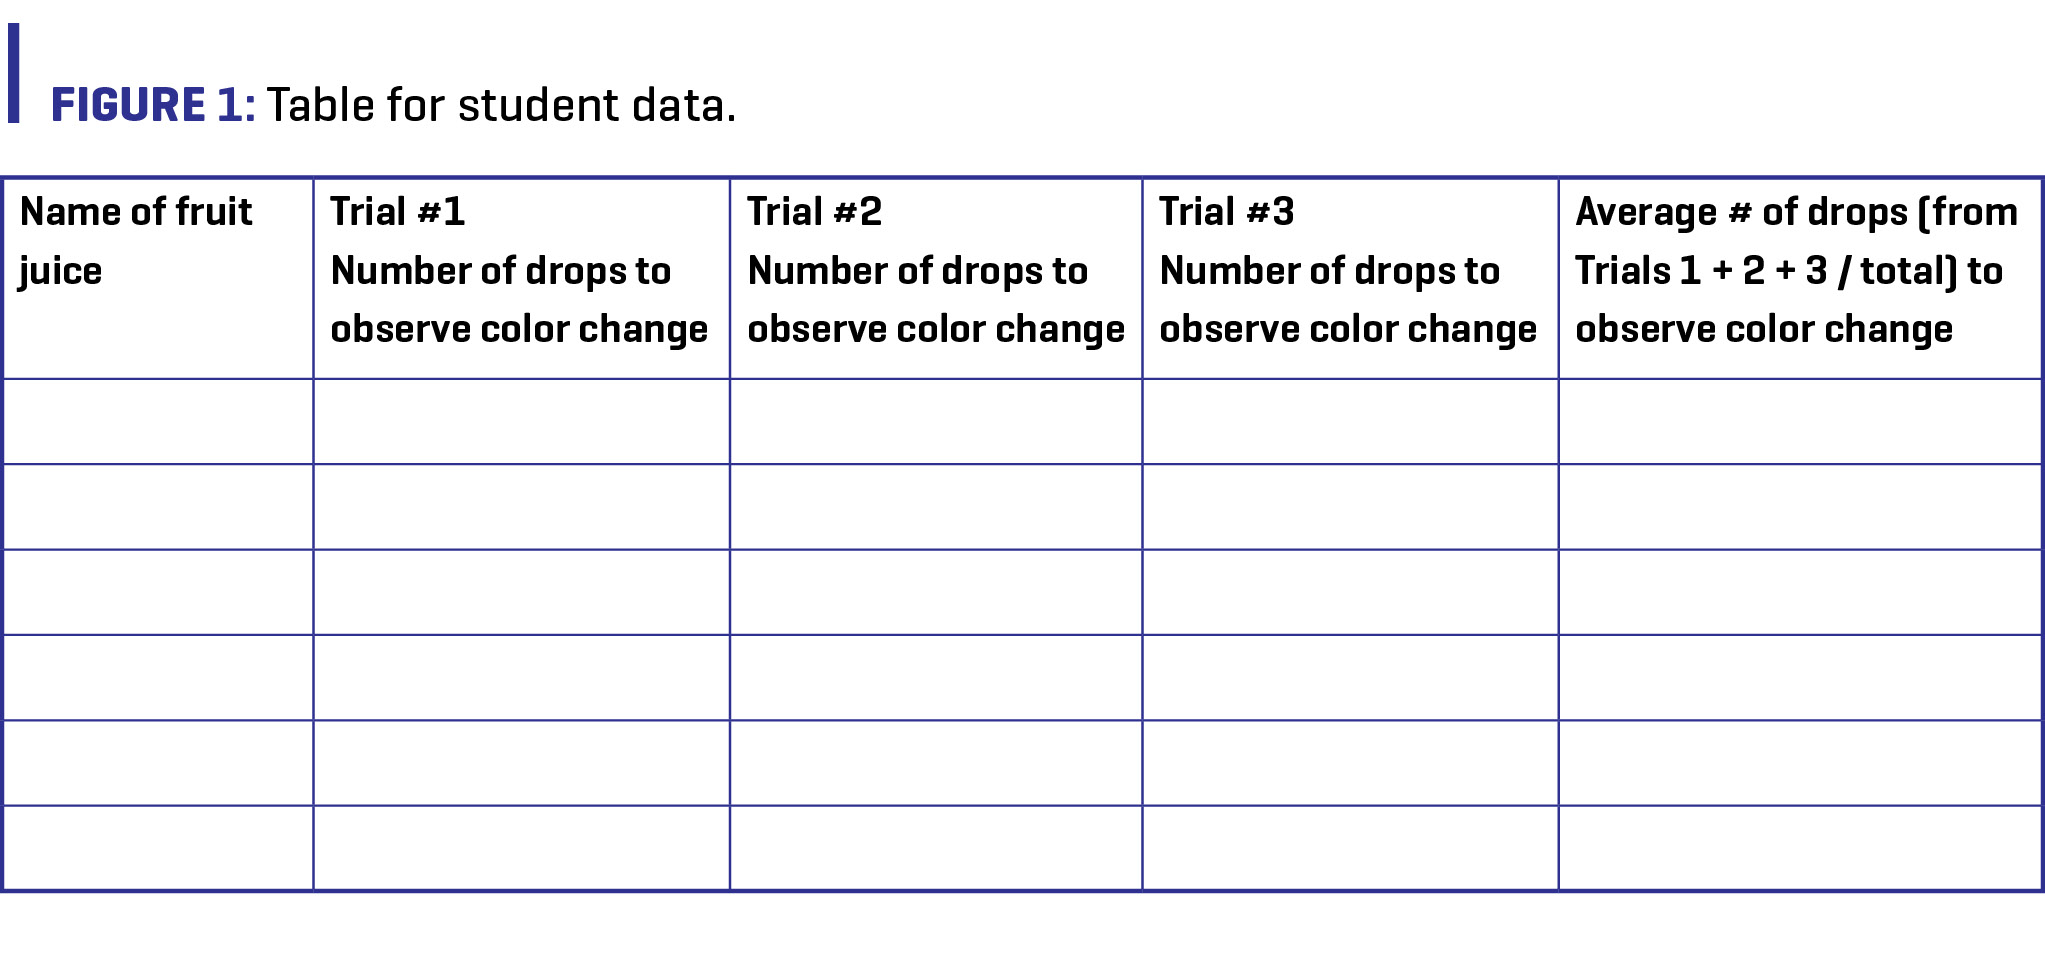 FIGURE 1: Table for student data.